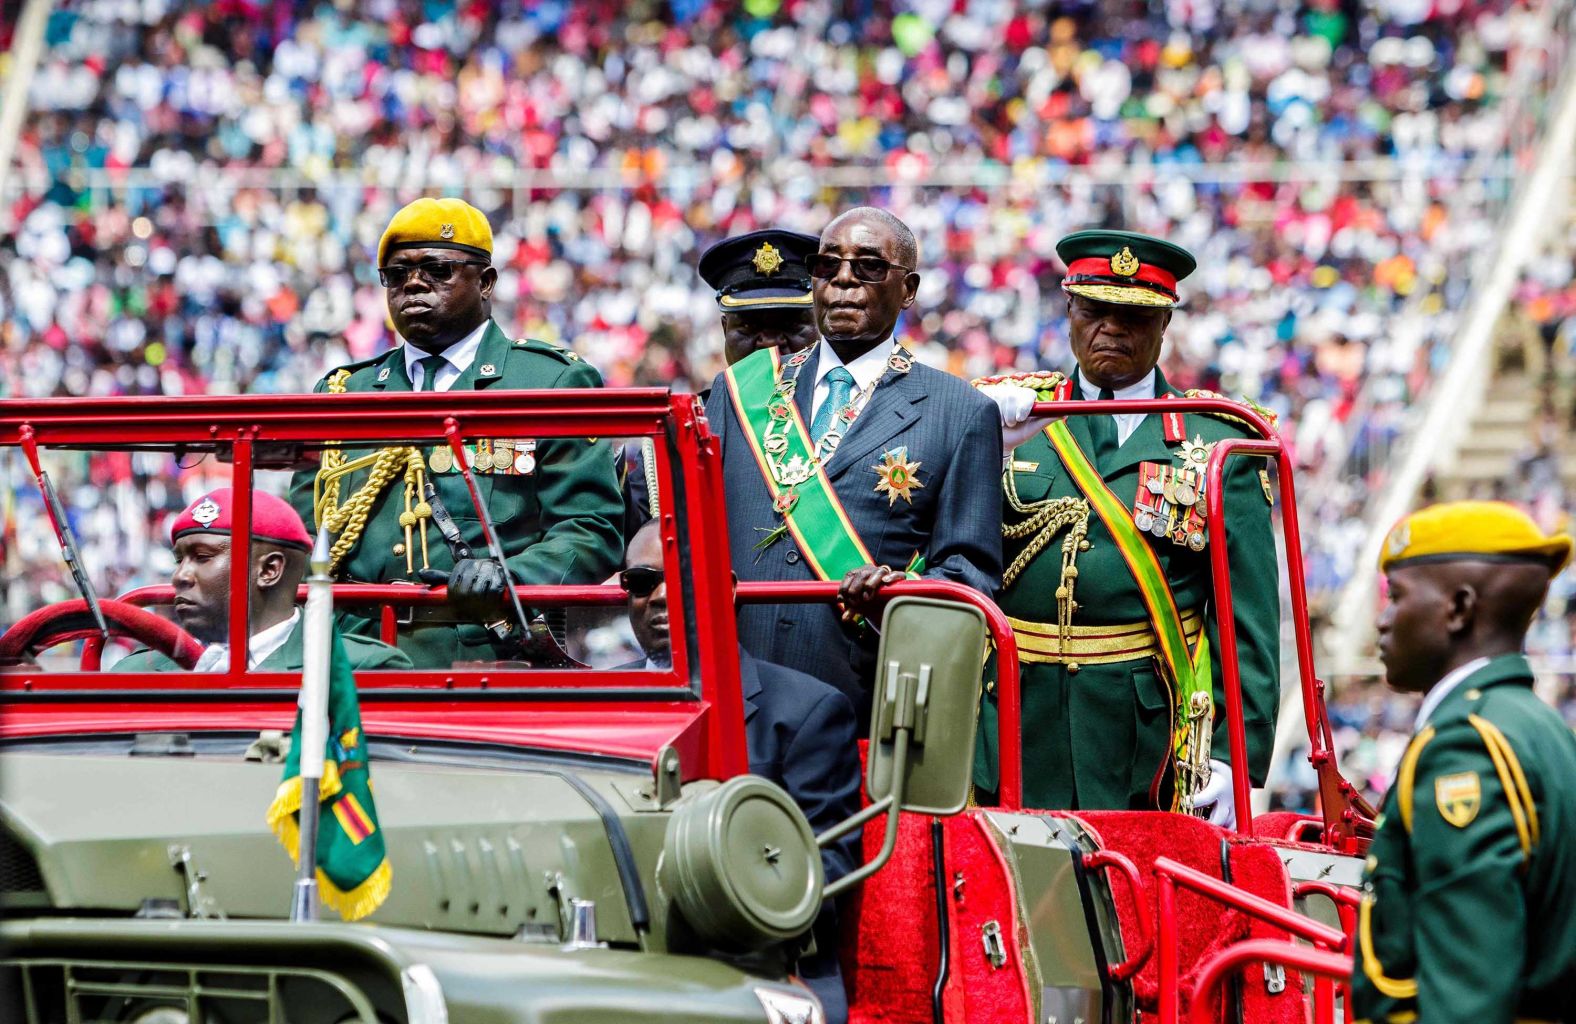 Mugabe reviews the guard of honor during Zimbabwe's 37th Independence Day celebrations in April 2017.